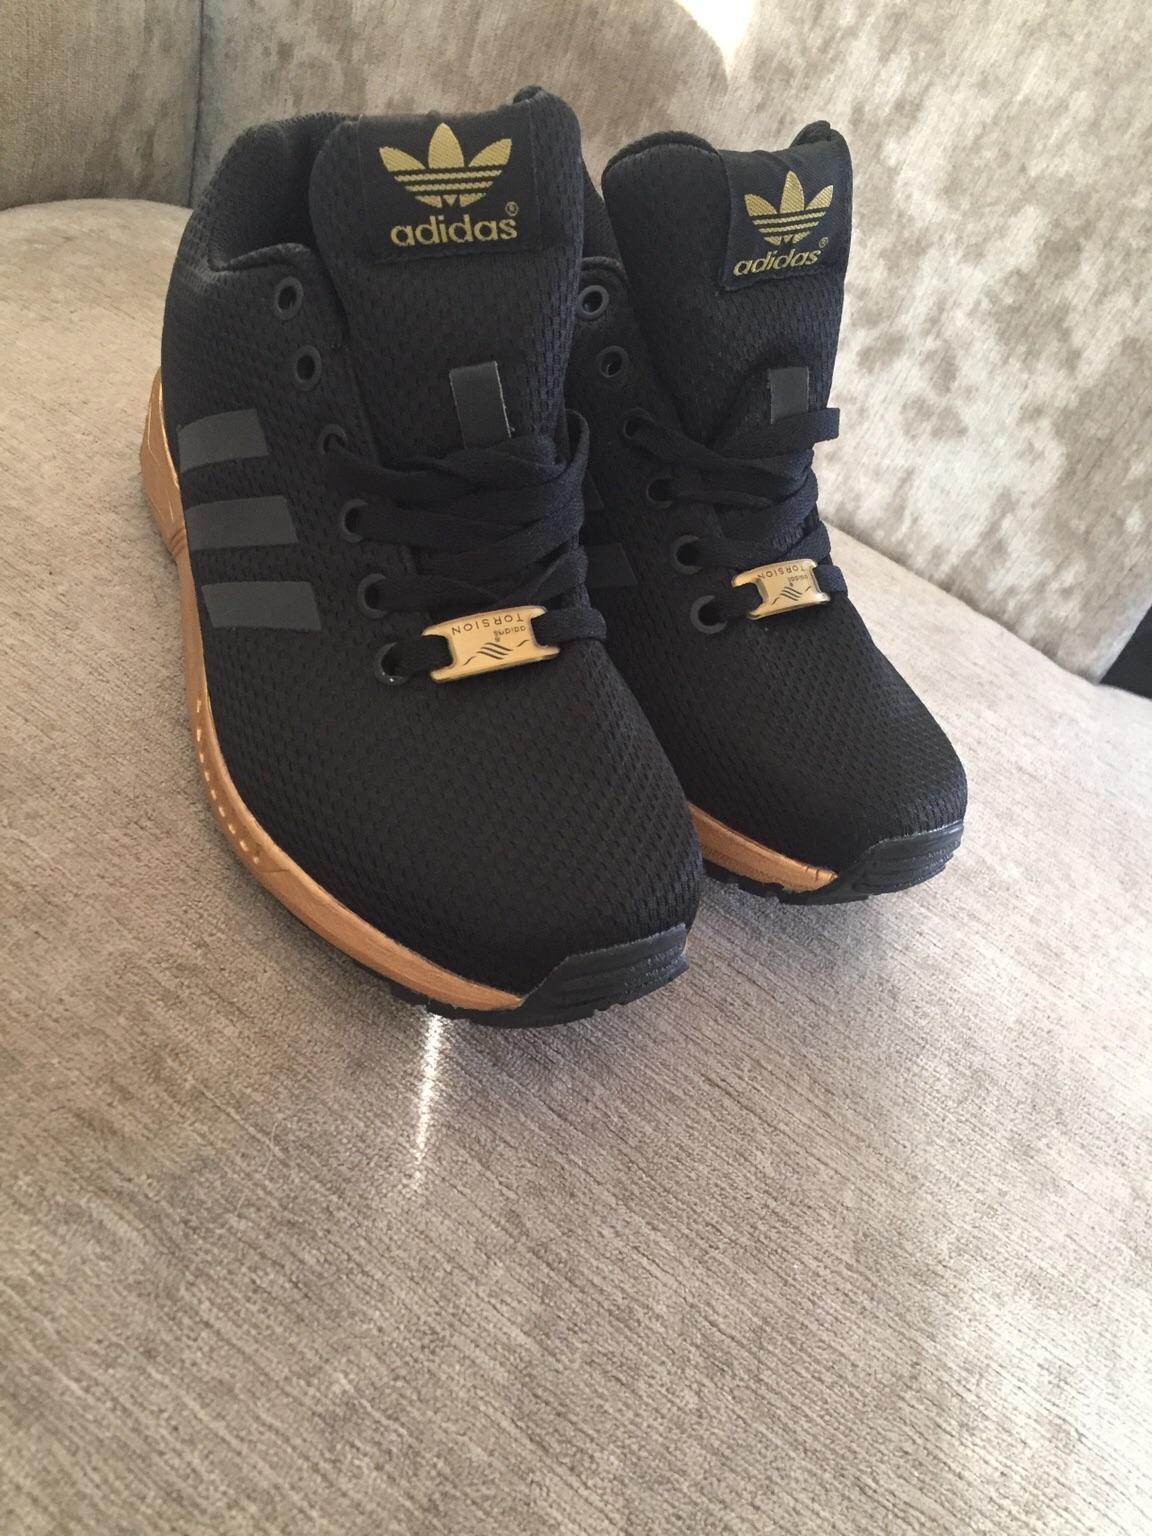 Staple Mig sarkom Shoes, Adidas Shoes, Adidas Rose Gold Zx Flux, Adidas, Adidas Zx Flux, Black  Sneakers, Black, Gold, Adiddas, Black And Gold Adidas Flux, Low Top  Sneakers Wheretoget | xn--90absbknhbvge.xn--p1ai:443